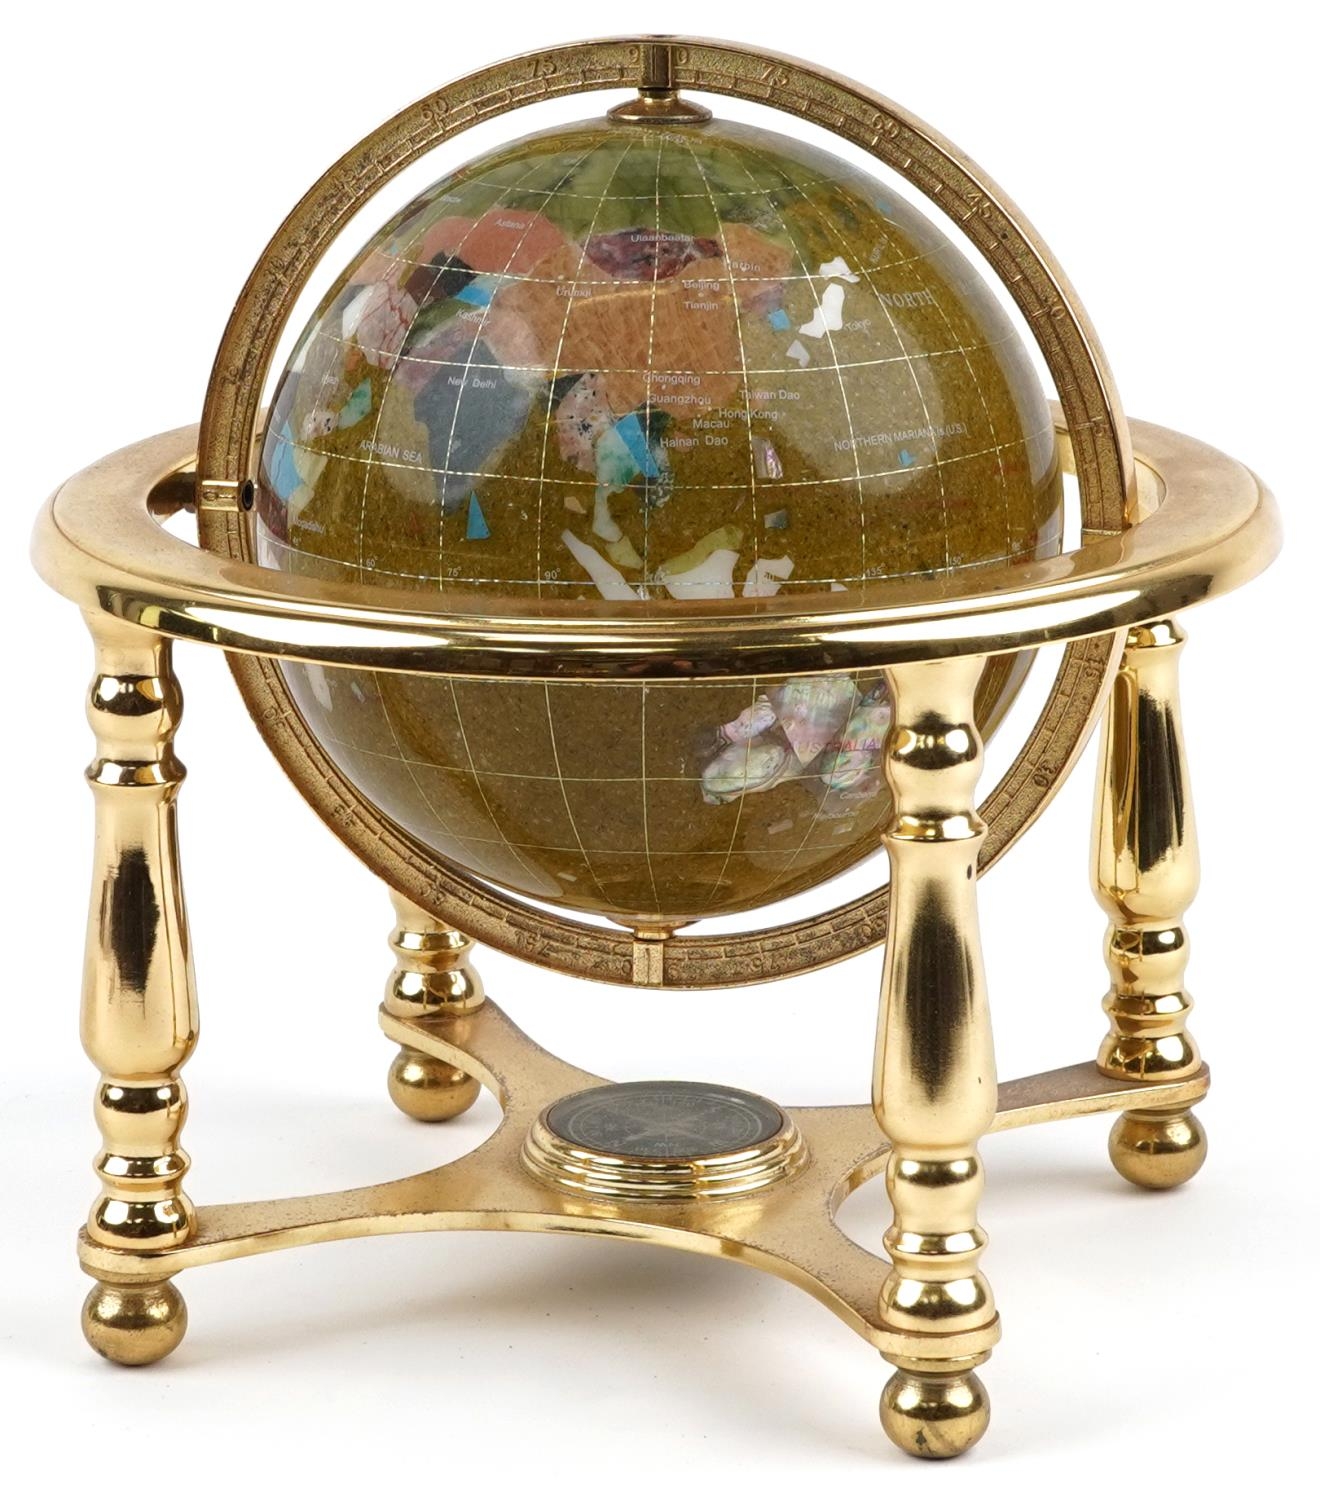 Contemporary polished stone table globe with brass stand and compass under tier, 23.5cm high